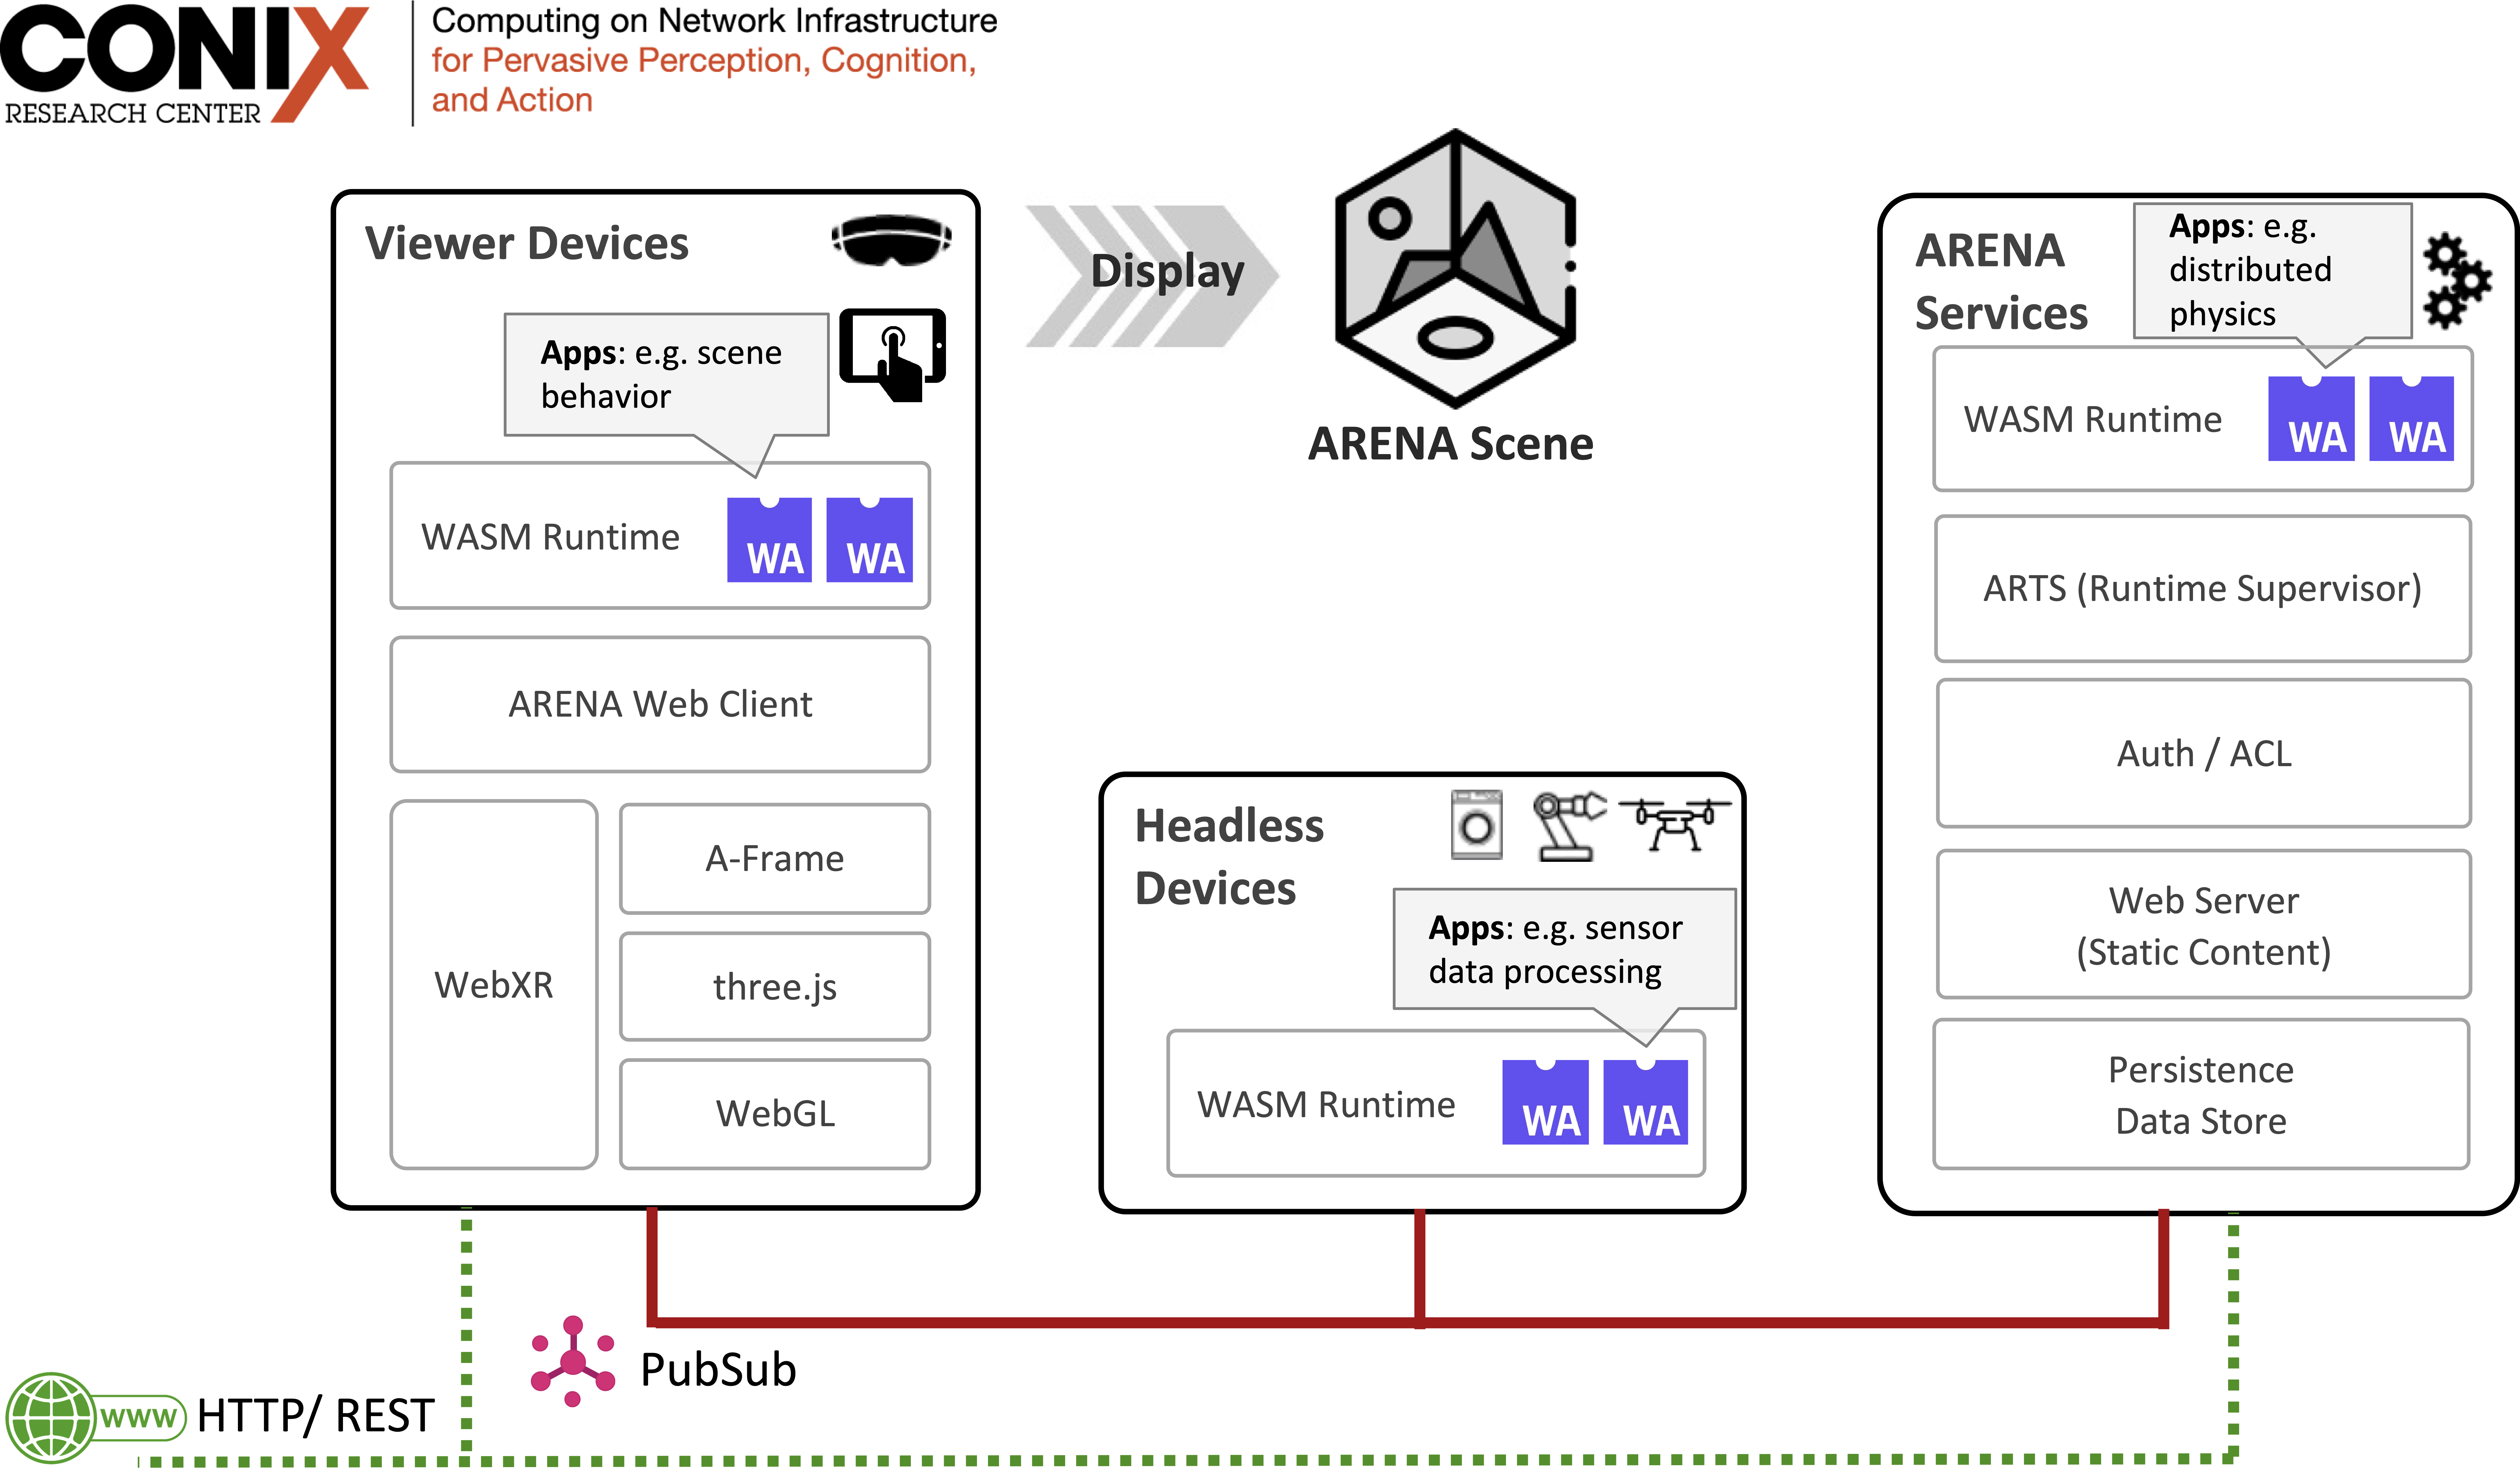 The Augmented Reality Edge Networking Architecture (ARENA) image